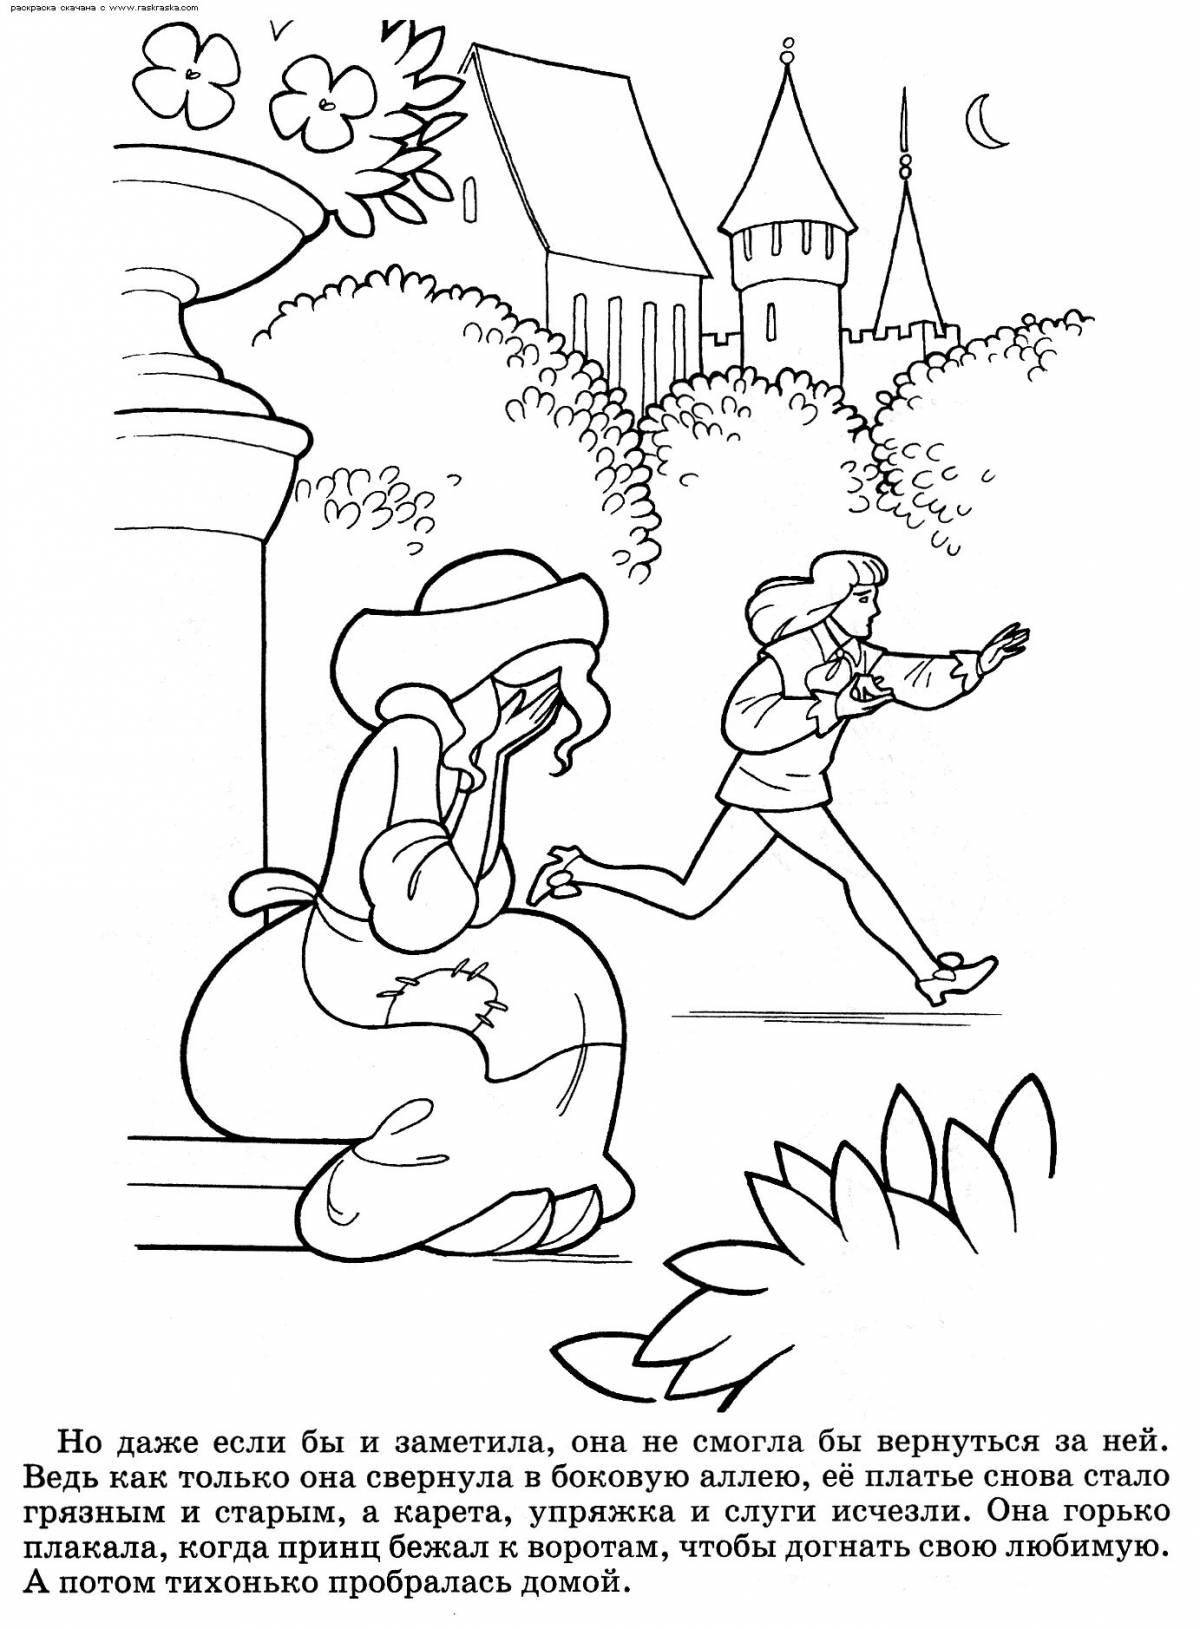 Charming Cinderella and Charles Perrault coloring book